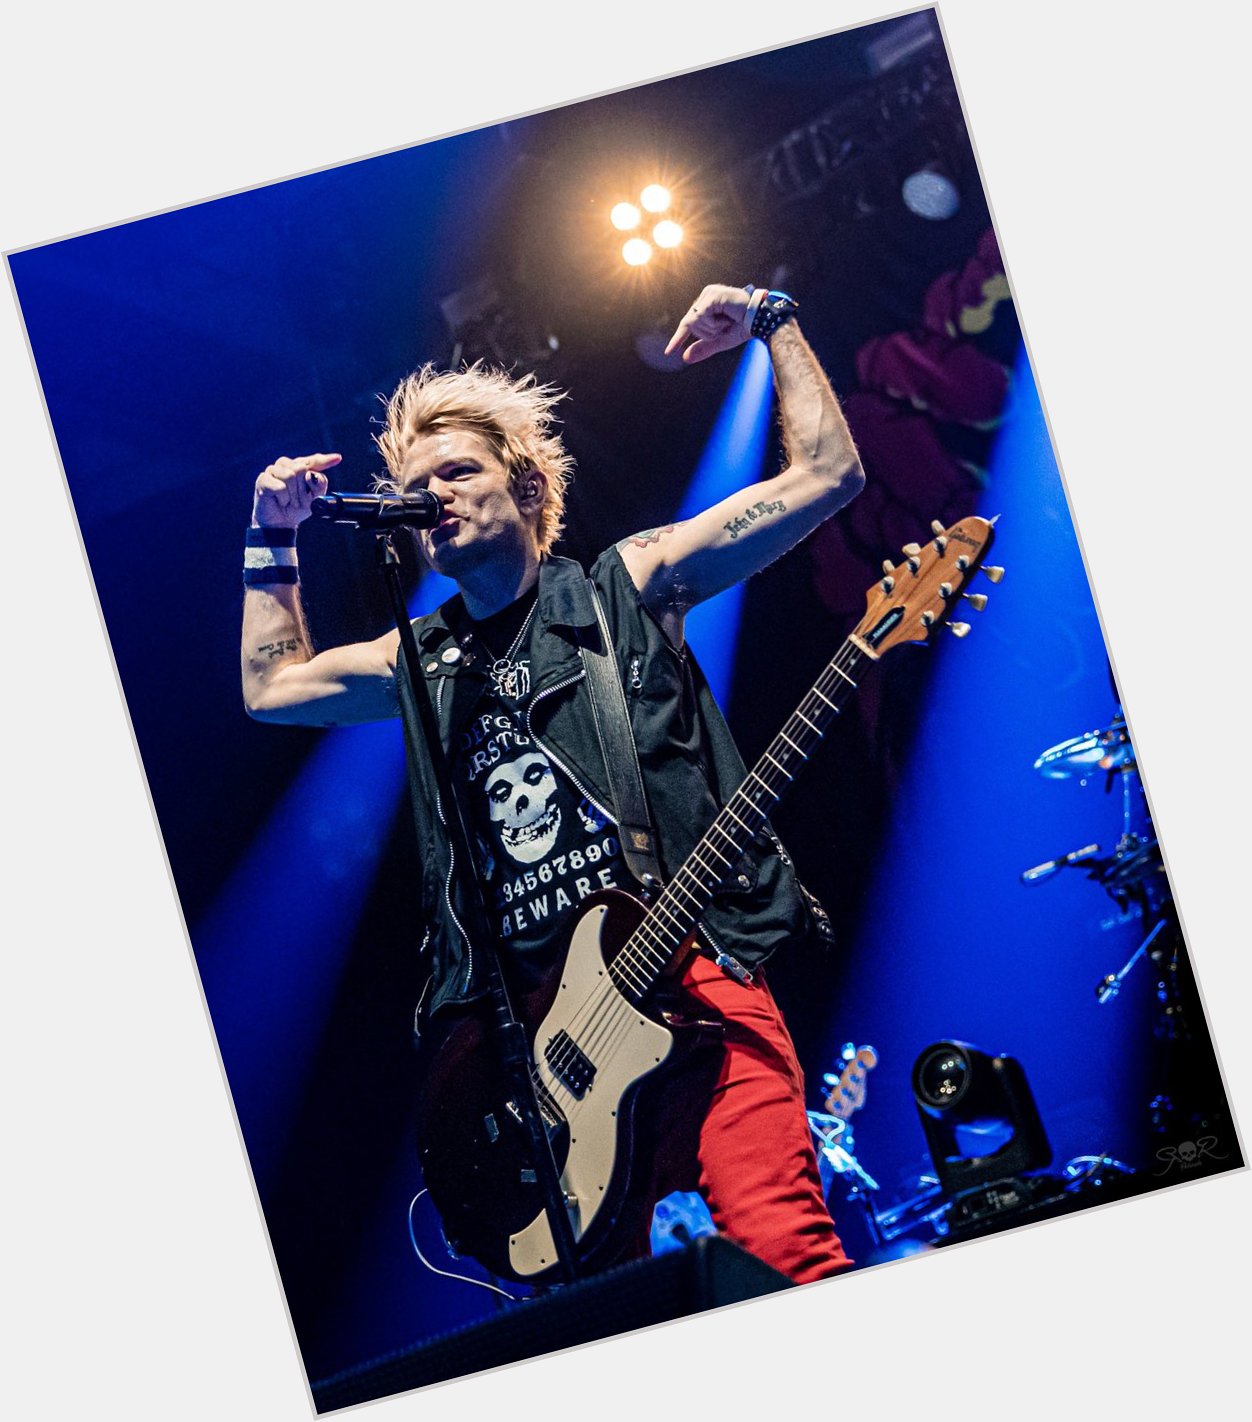 Happy Birthday to Deryck Whibley of 